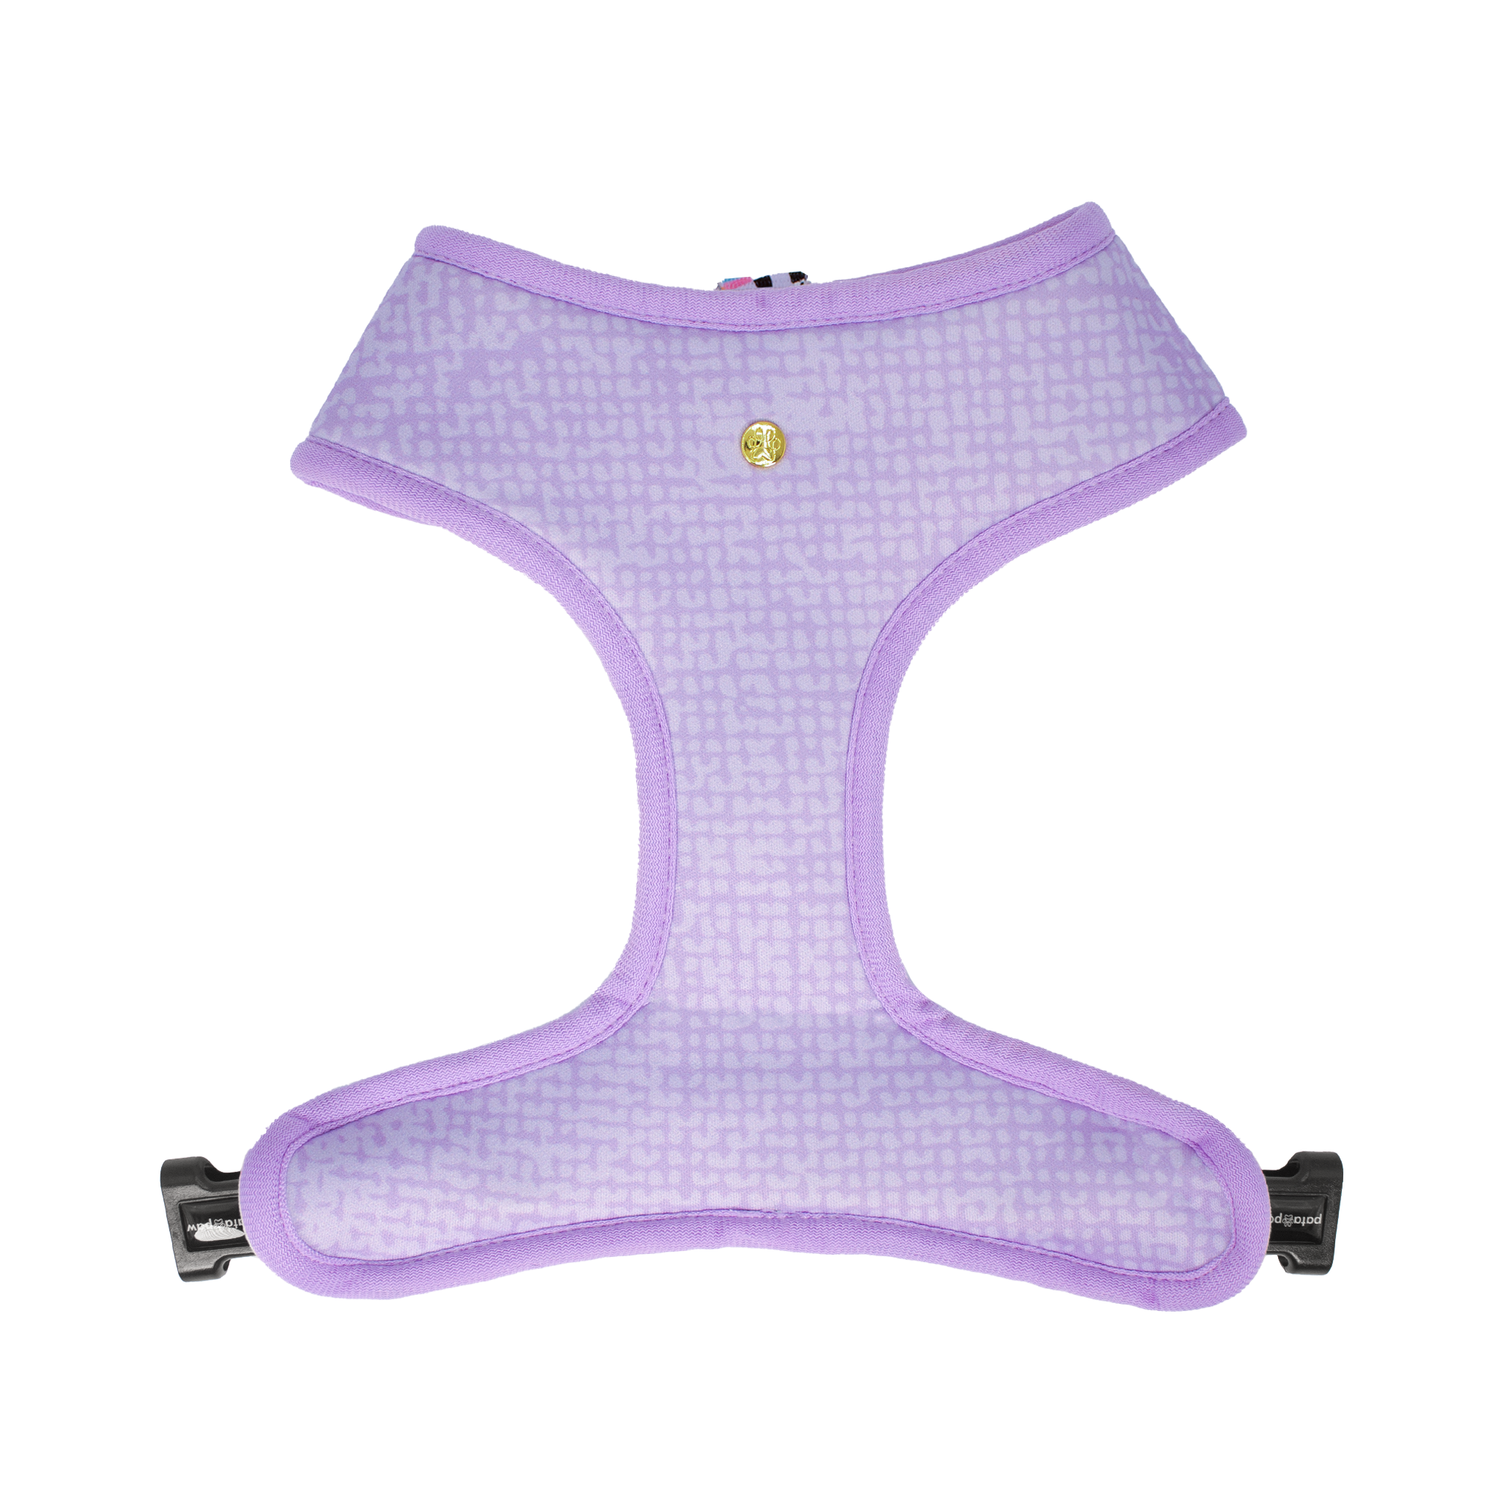 Pata Paw toucan tropics reversible harness showing a timeless and chic texture pattern in lilac.